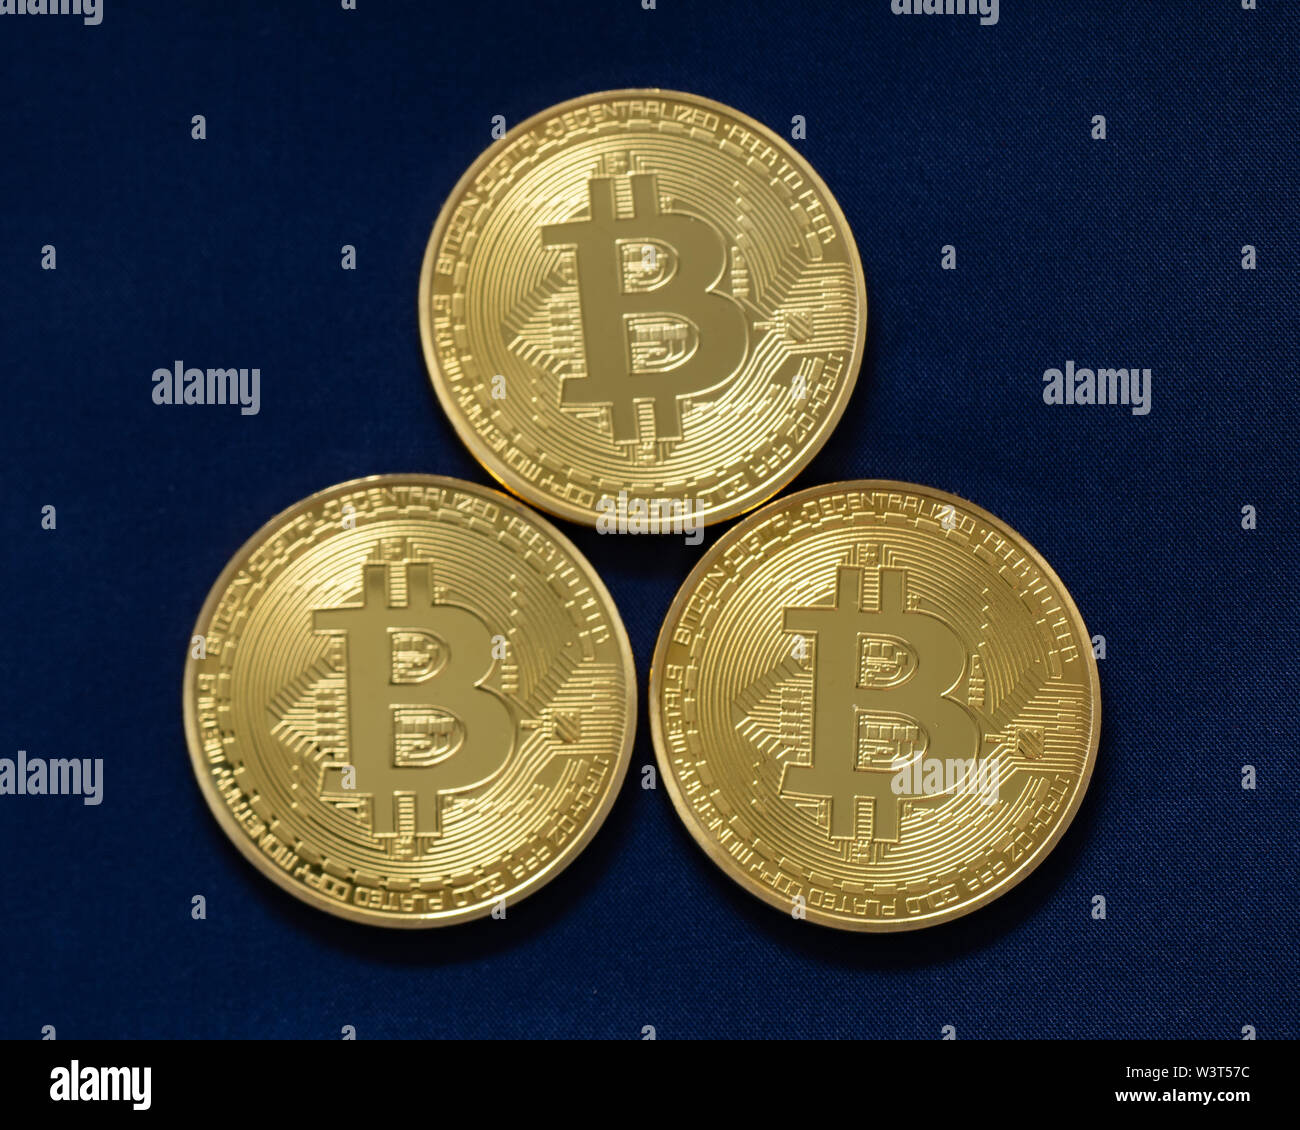 Three bitcoins, symbols for the cryptocurrency used on the internet. Stock Photo